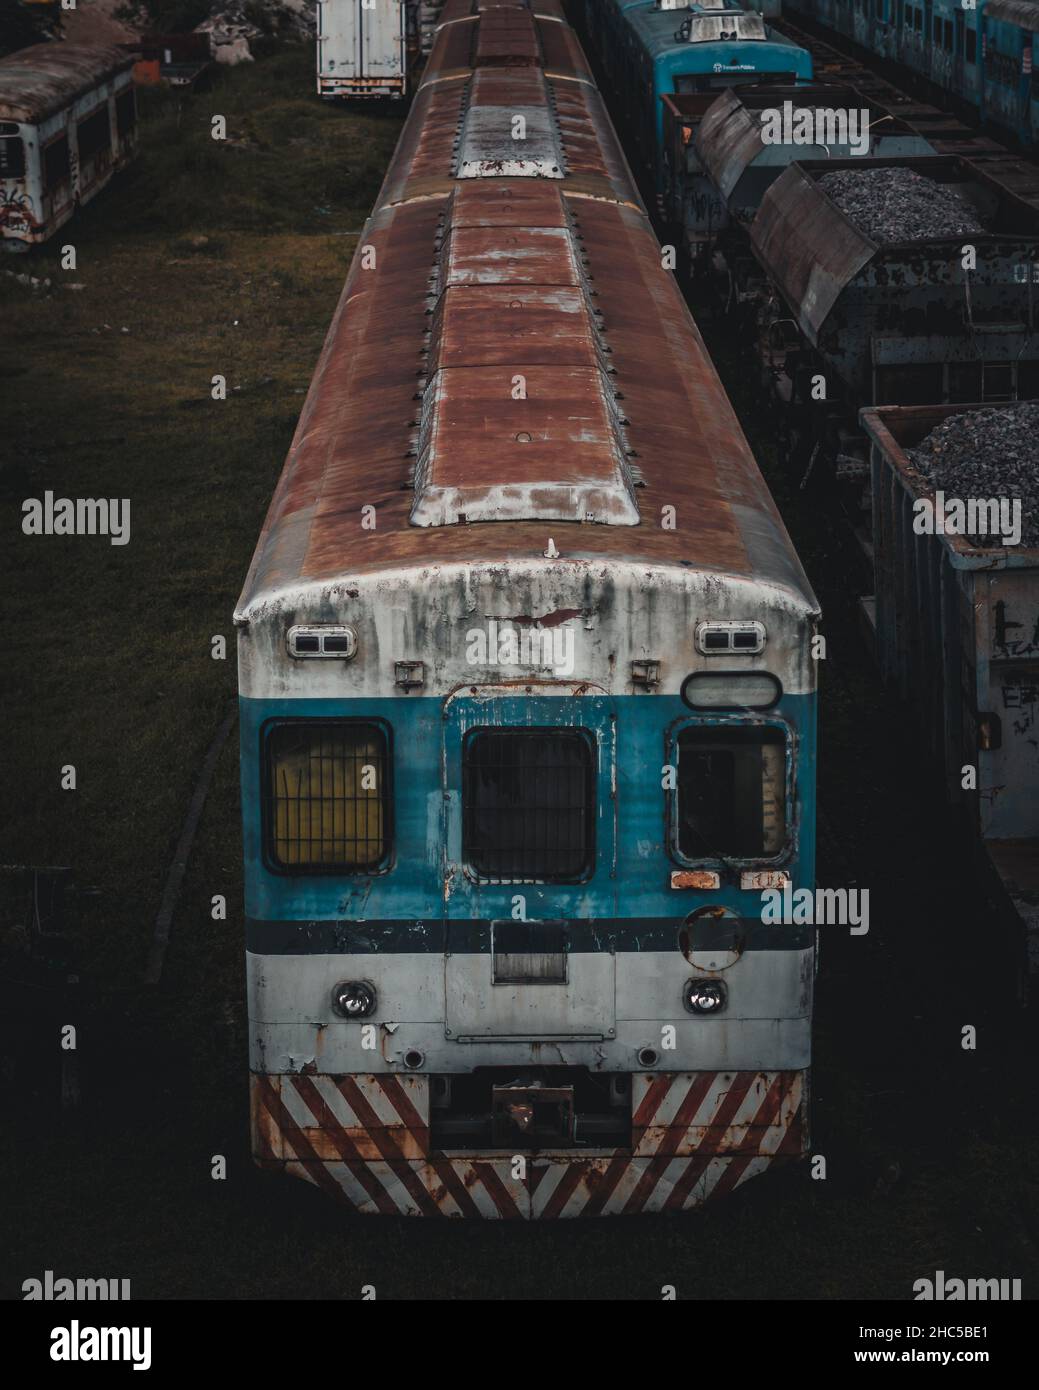 Vertical shot of an old train and freight cars at night Stock Photo